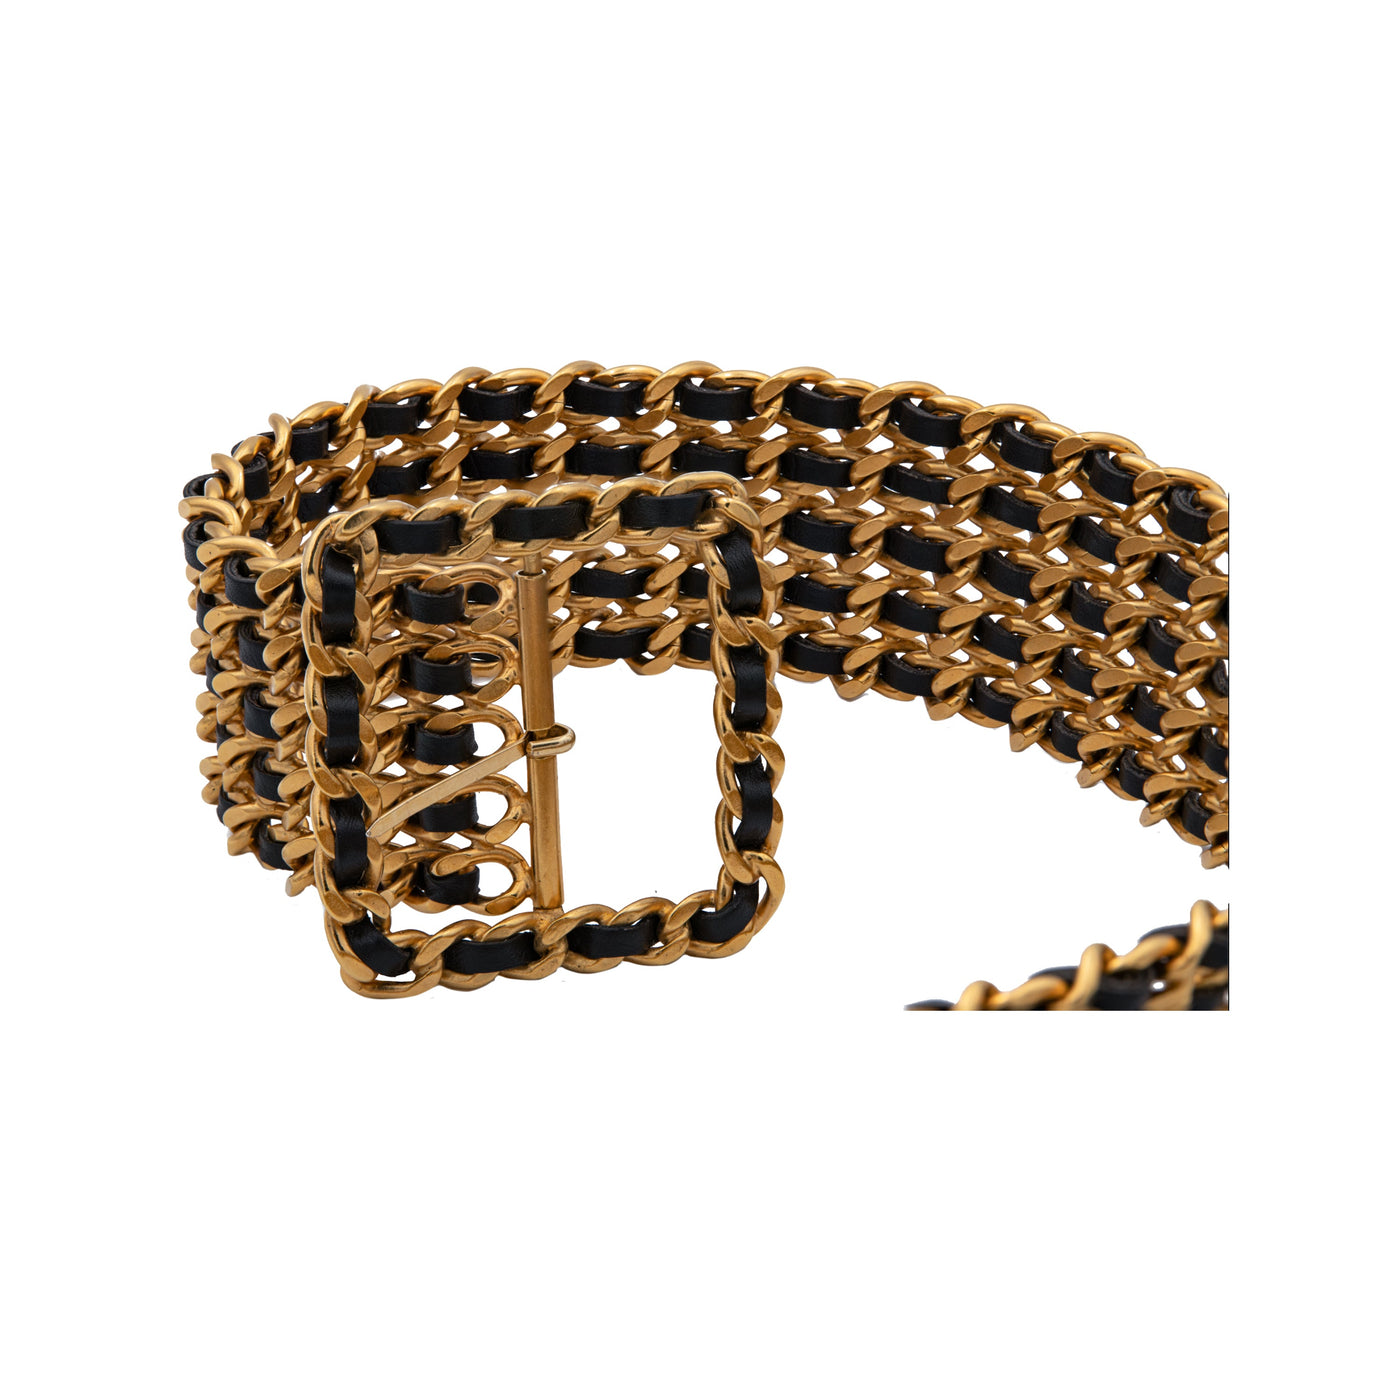 Chanel belt woven with black leather and gold chains. Maxi style with frontal buckle pre-owned nft